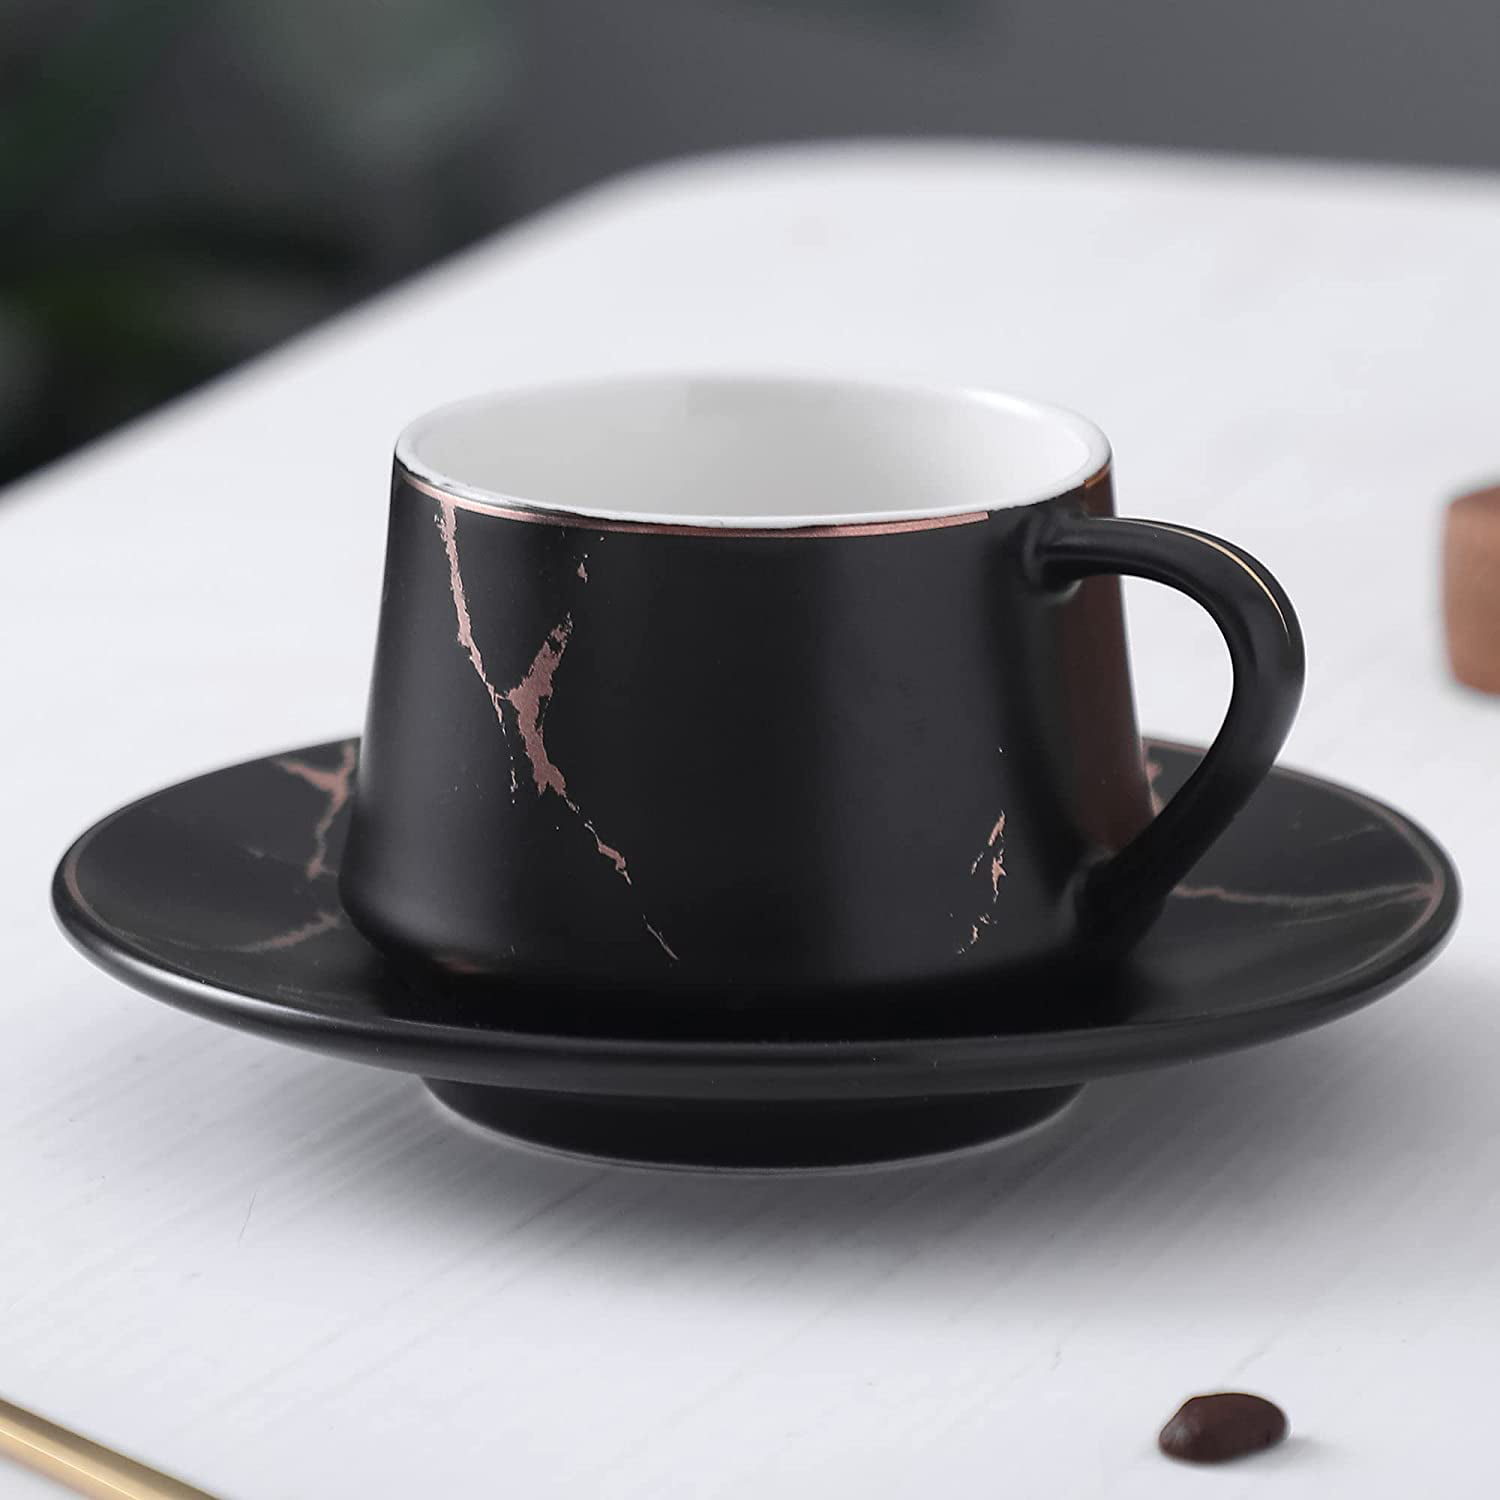 DANSHER Ceramic Coffee Cups with Saucers Set of 6 Black Small Espresso Cups 4 Ounce Gold Marble Pattern Porcelain Coffee Mugs Set Modern Tea Cup Set